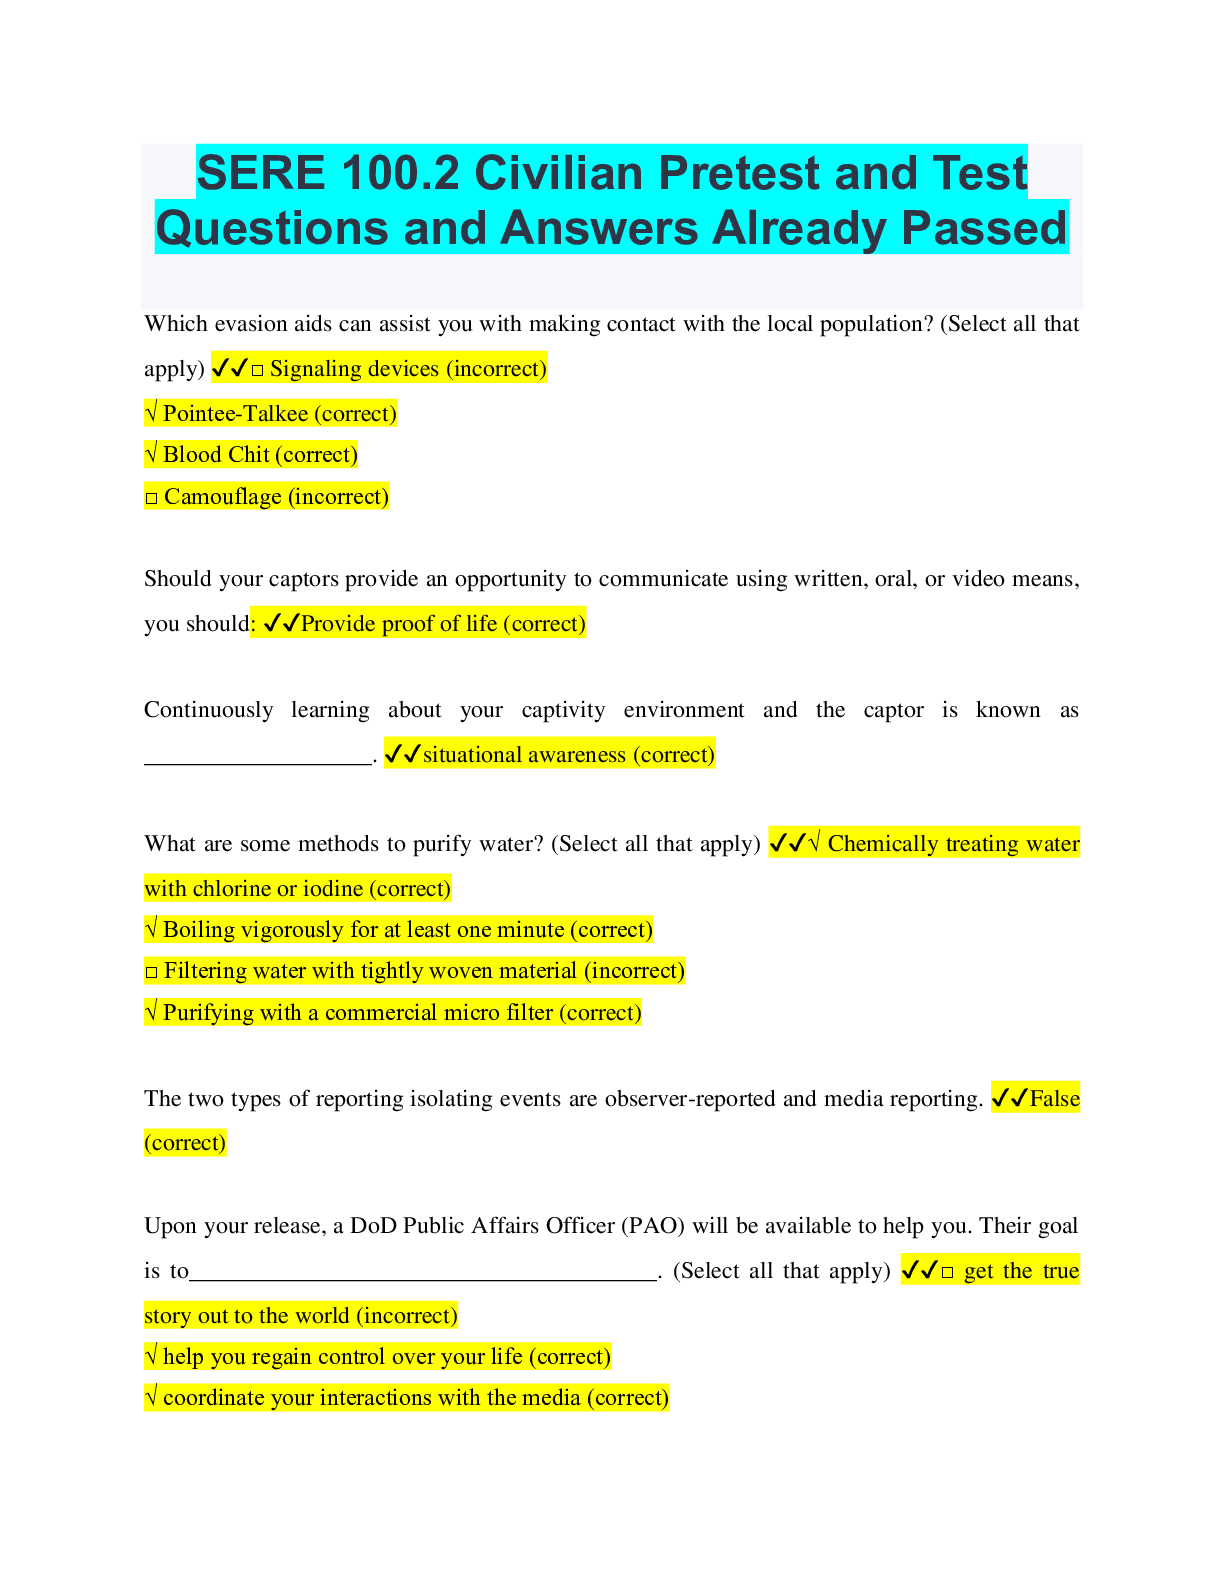 SERE 100.2 Civilian Pretest and Test Questions and Answers Already Passed